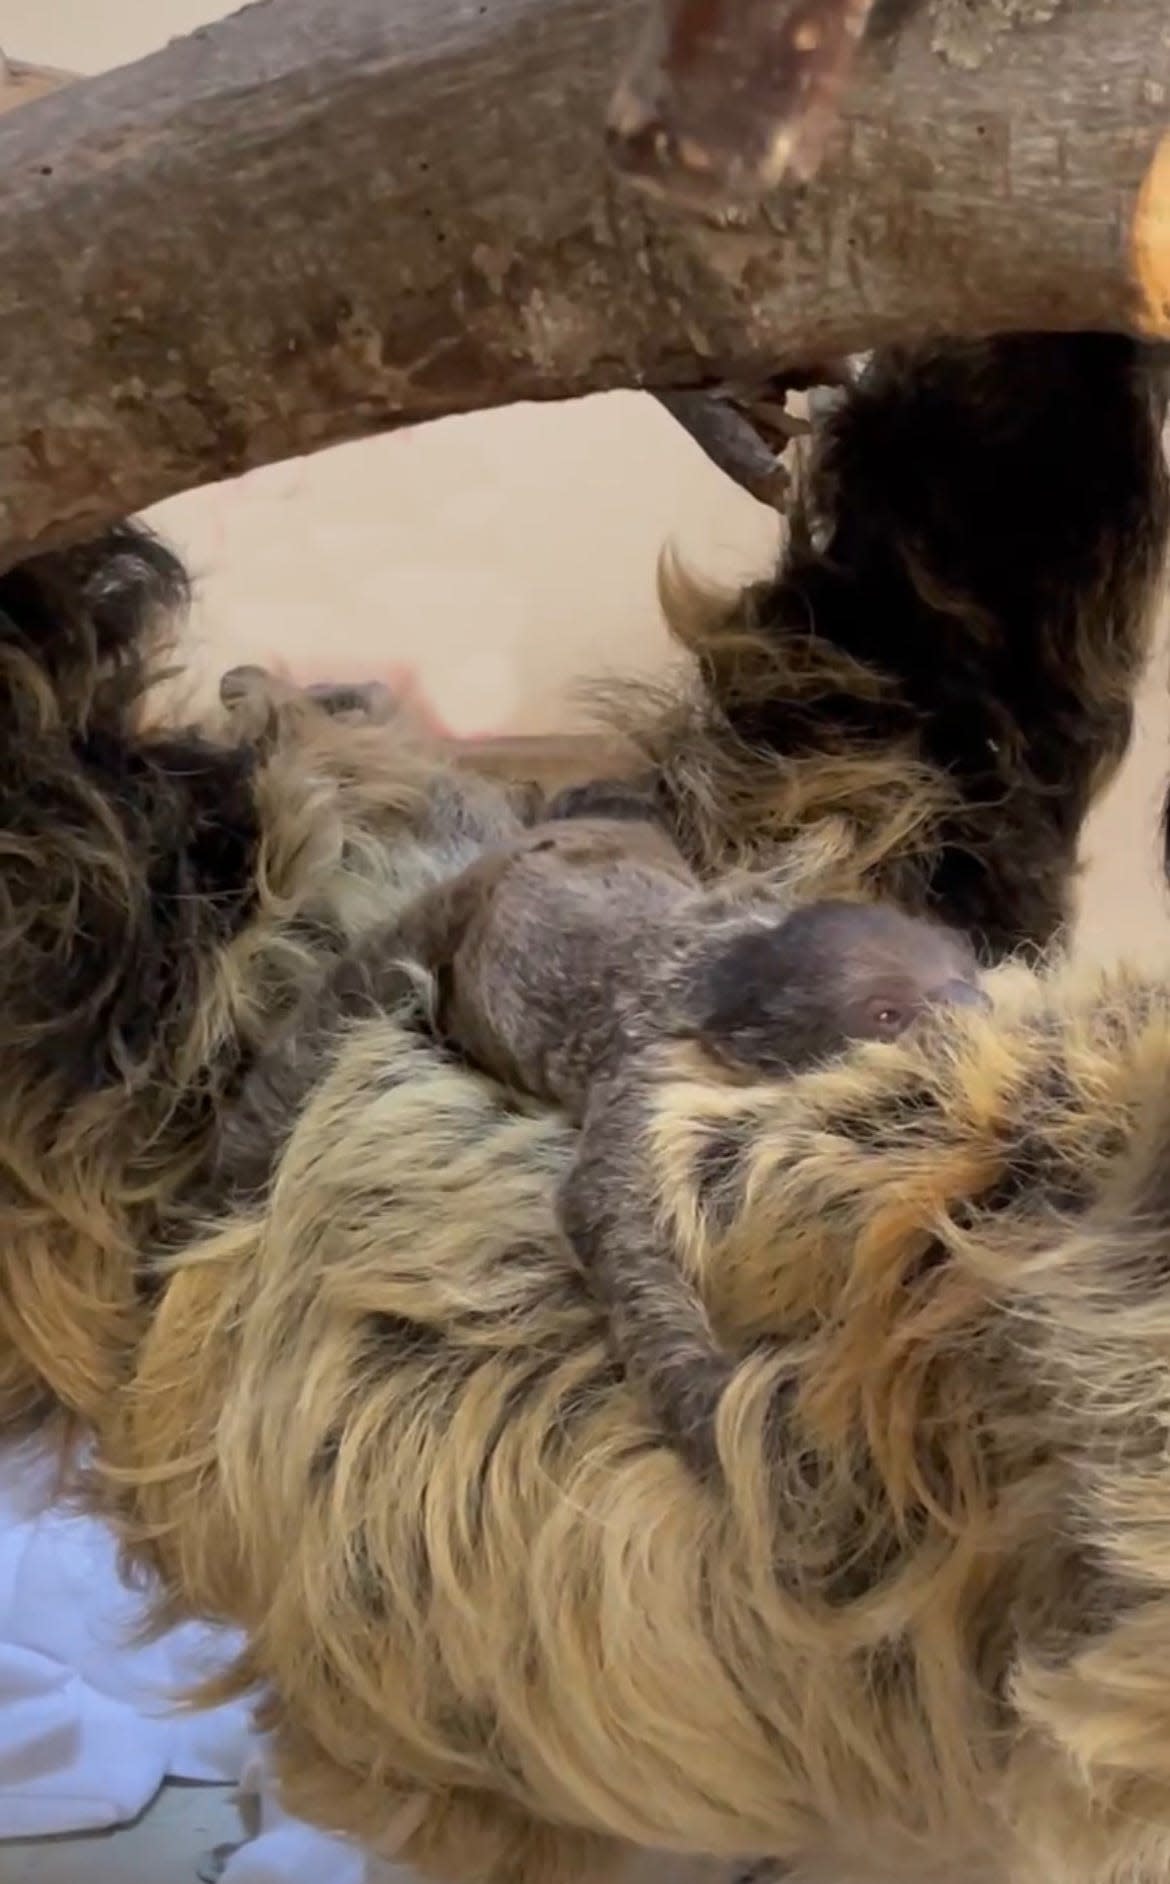 Lightning, a two-toed sloth at the Cincinnati Zoo & Botanical Garden, gave birth to her baby sloth Wednesday.